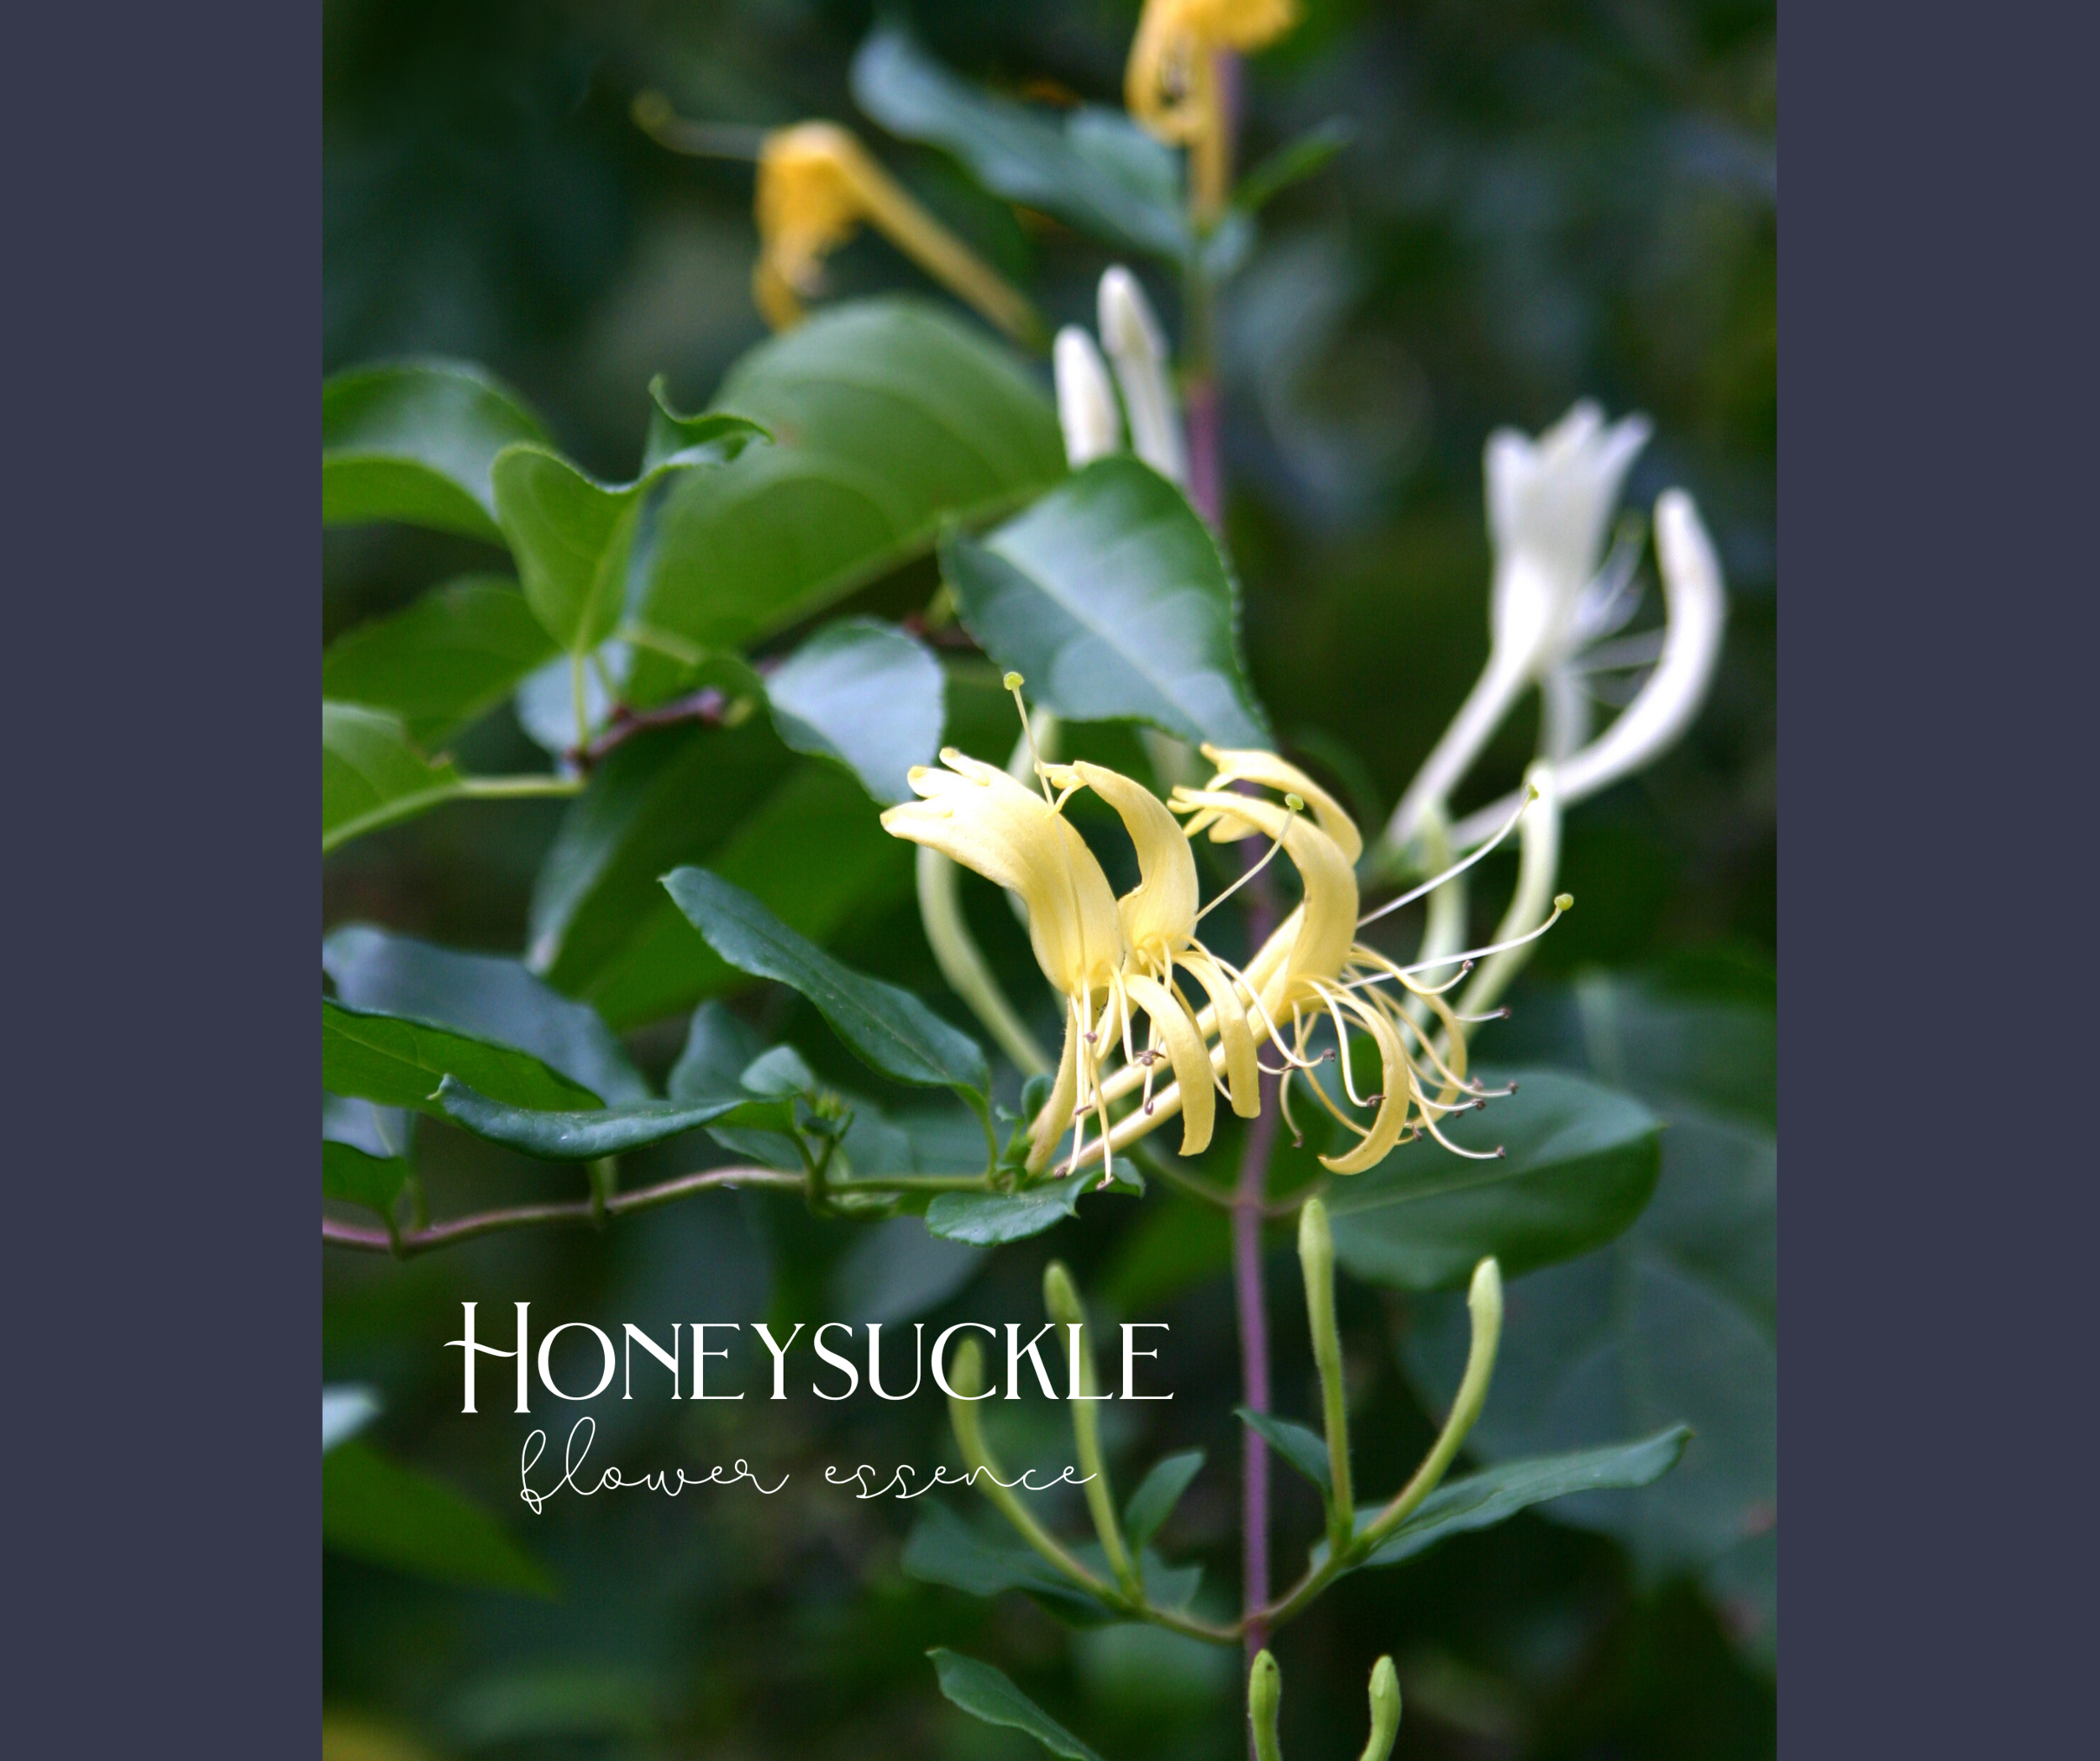 Honeysuckle Cover Photo.png